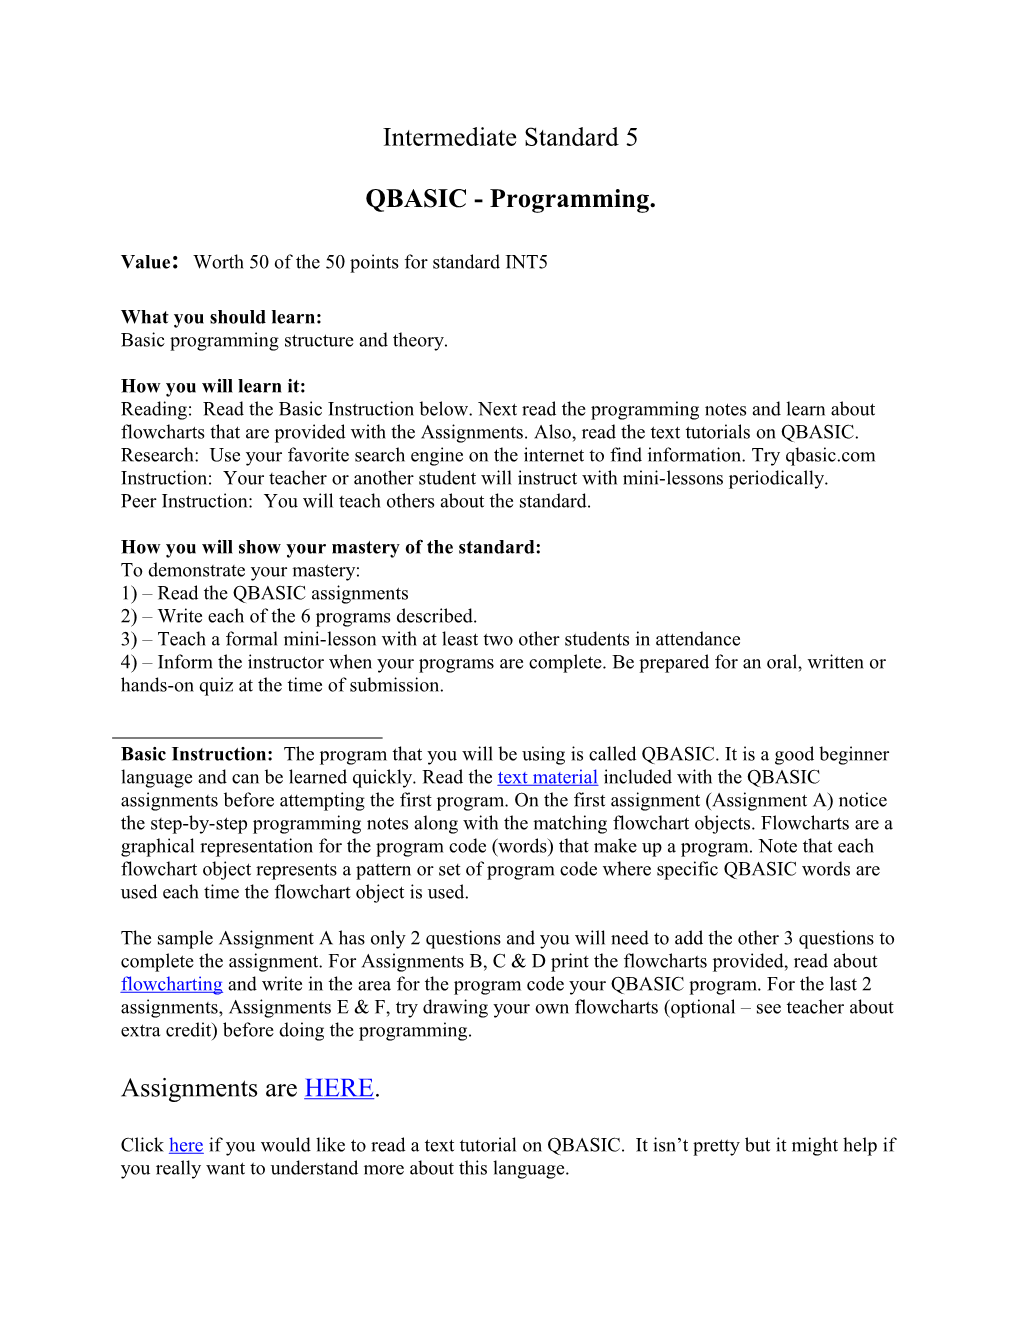 Qbasic Assignments for Intermediate Computers